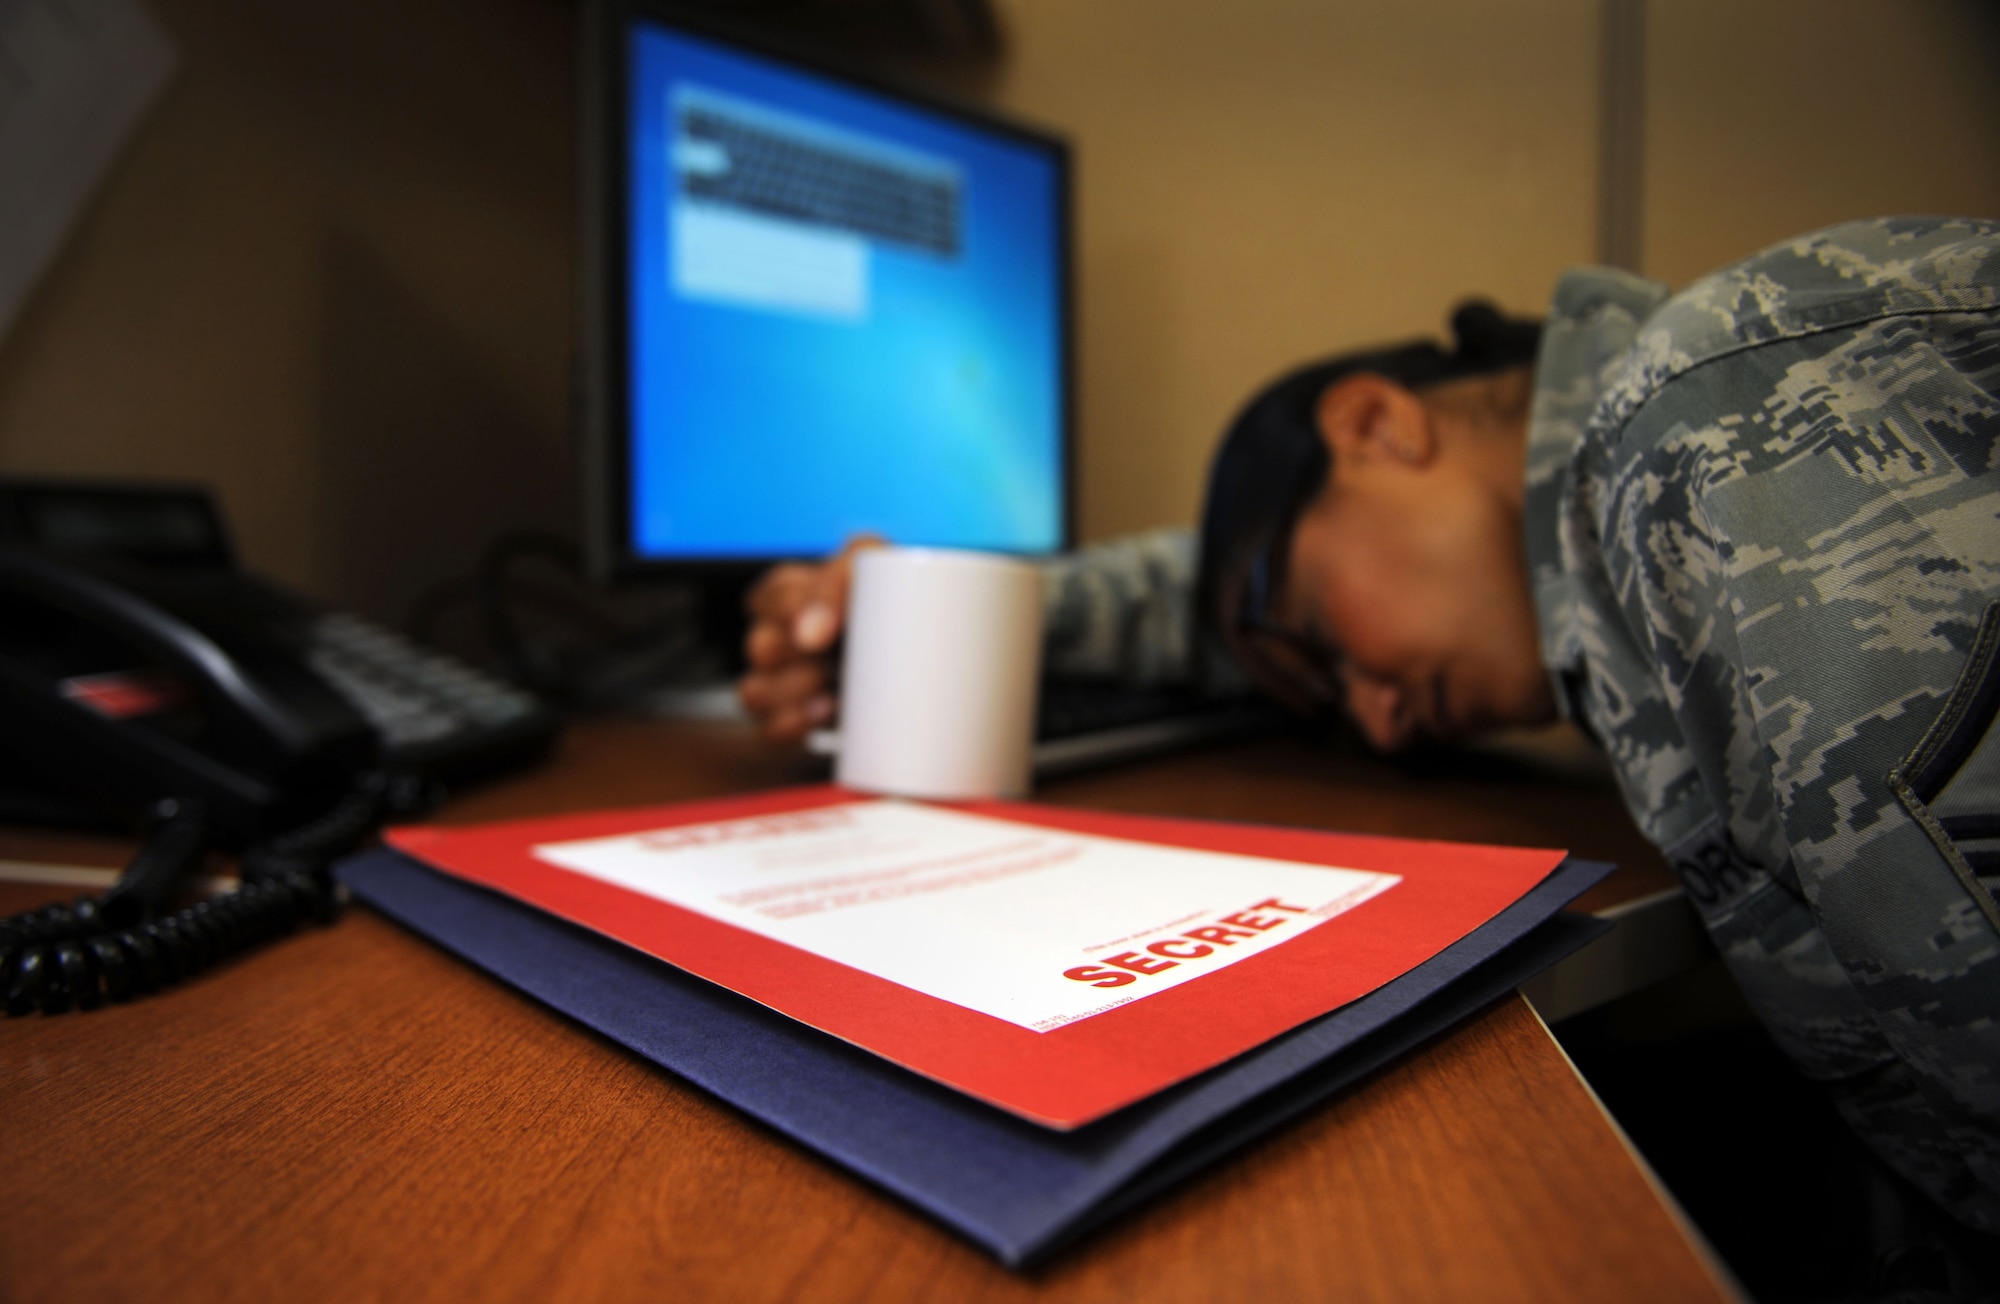 Fatigue could result in extreme sleepiness and loss of situational awareness, which may impact all levels of mission readiness, Aug. 14, 2012, Langley Air Force Base, Va. (U.S. Air Force photo by Staff Sgt. Krystie Martinez/Released)